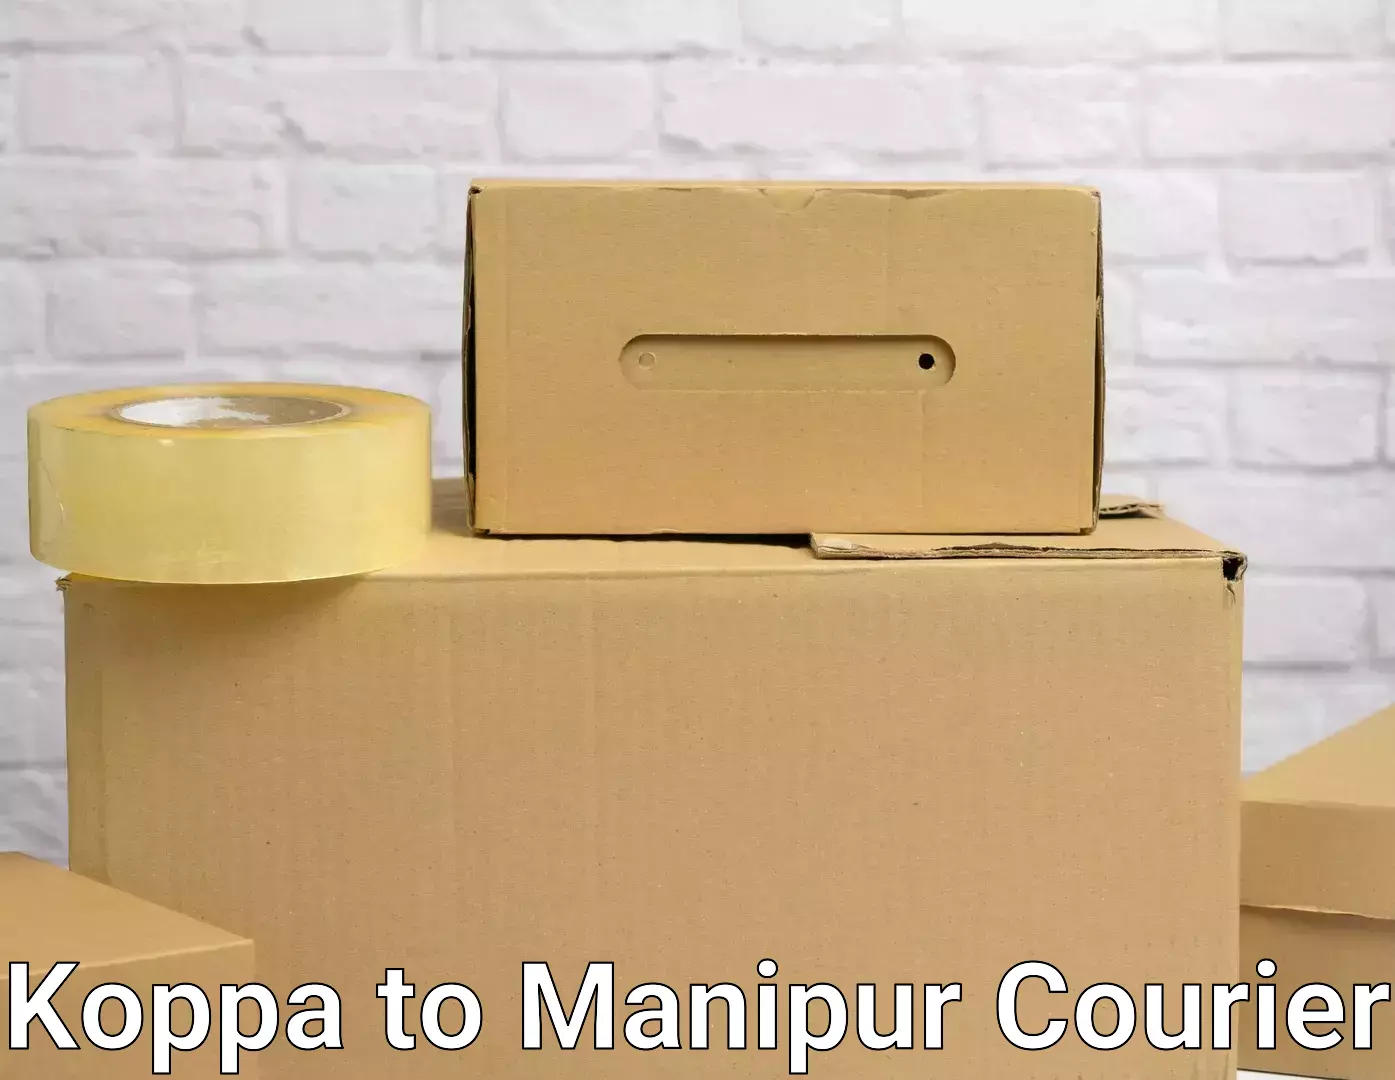 Full-service movers Koppa to Manipur